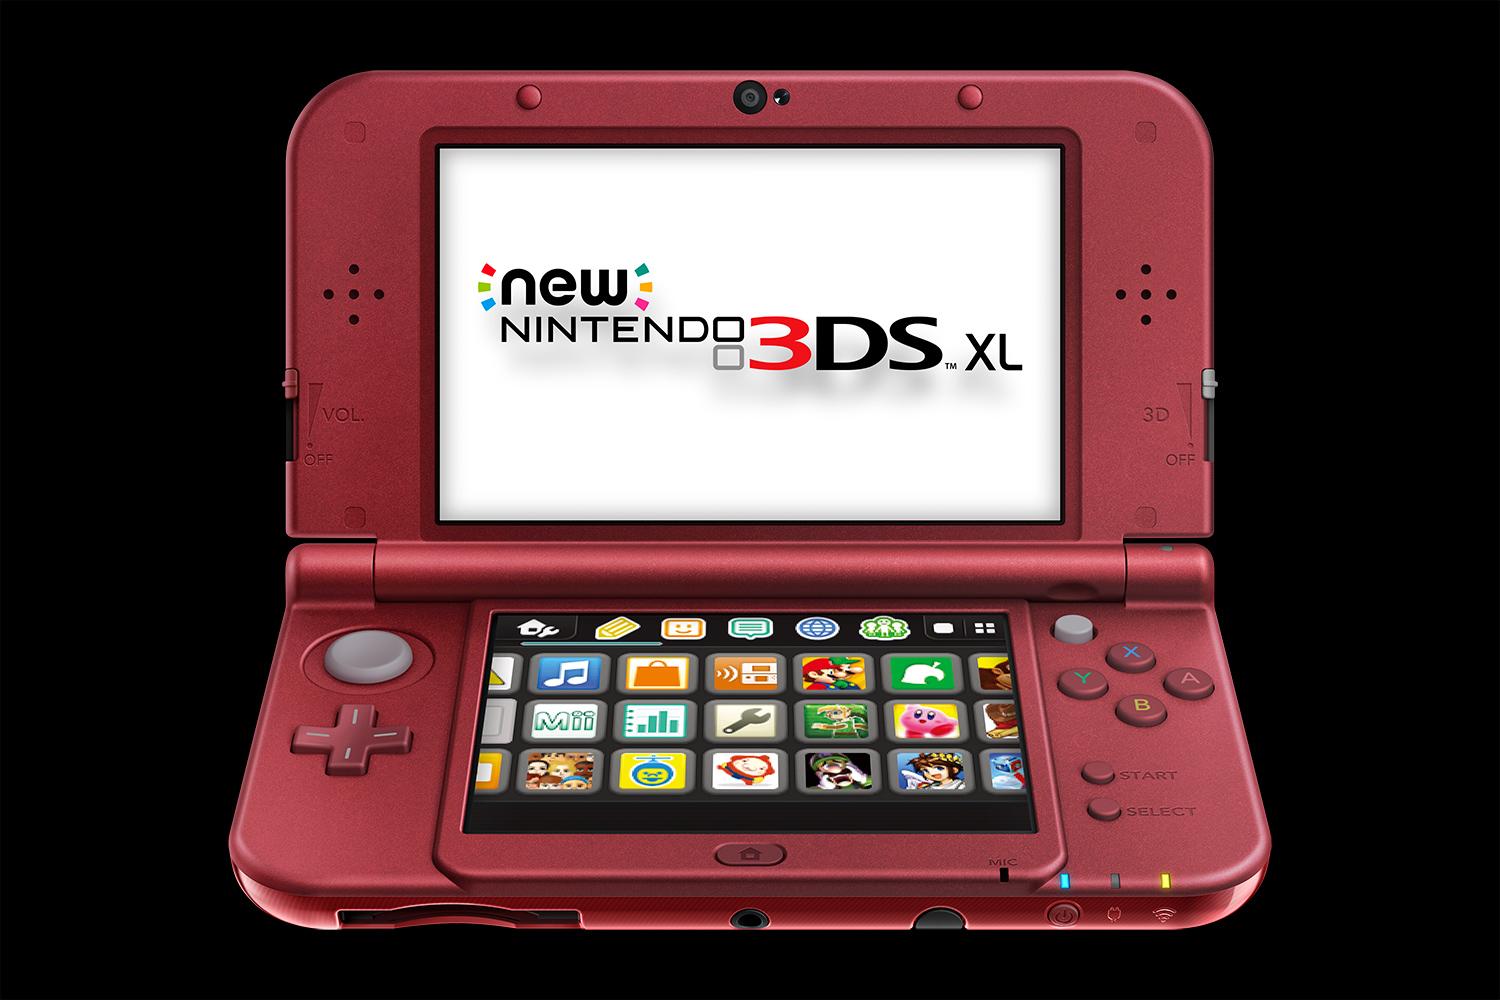 New Nintendo 3DS review | Handheld gaming console | Digital Trends